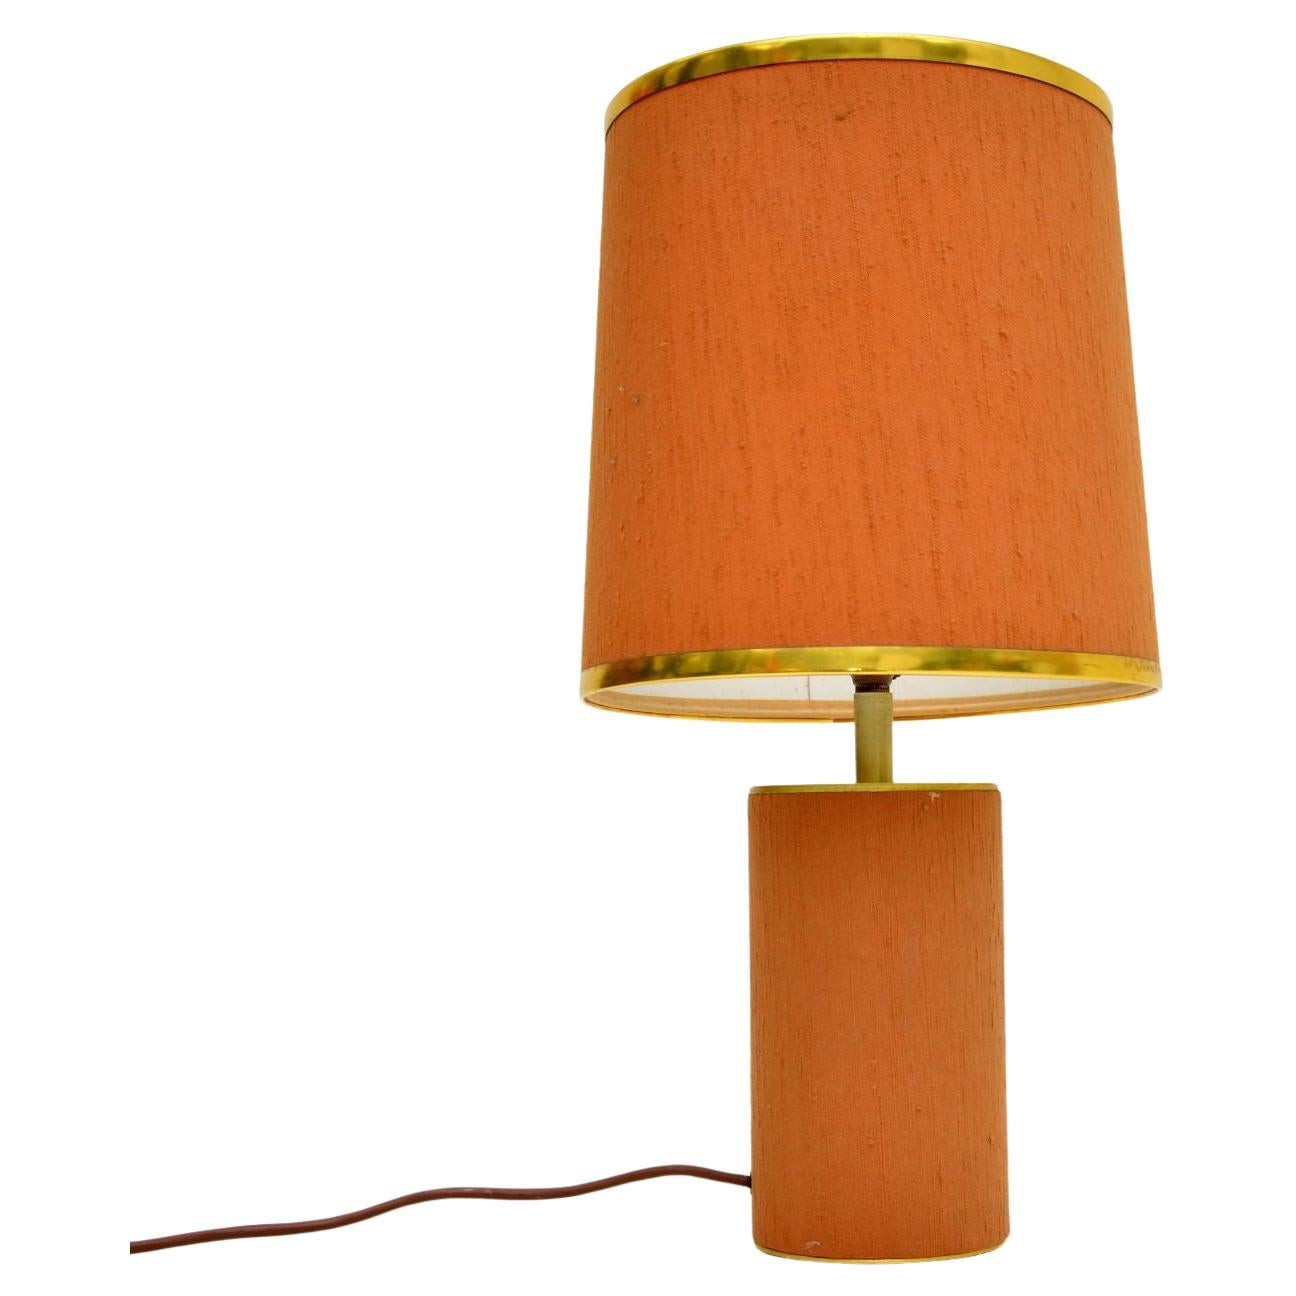 1970's, Vintage Table Lamp For Sale